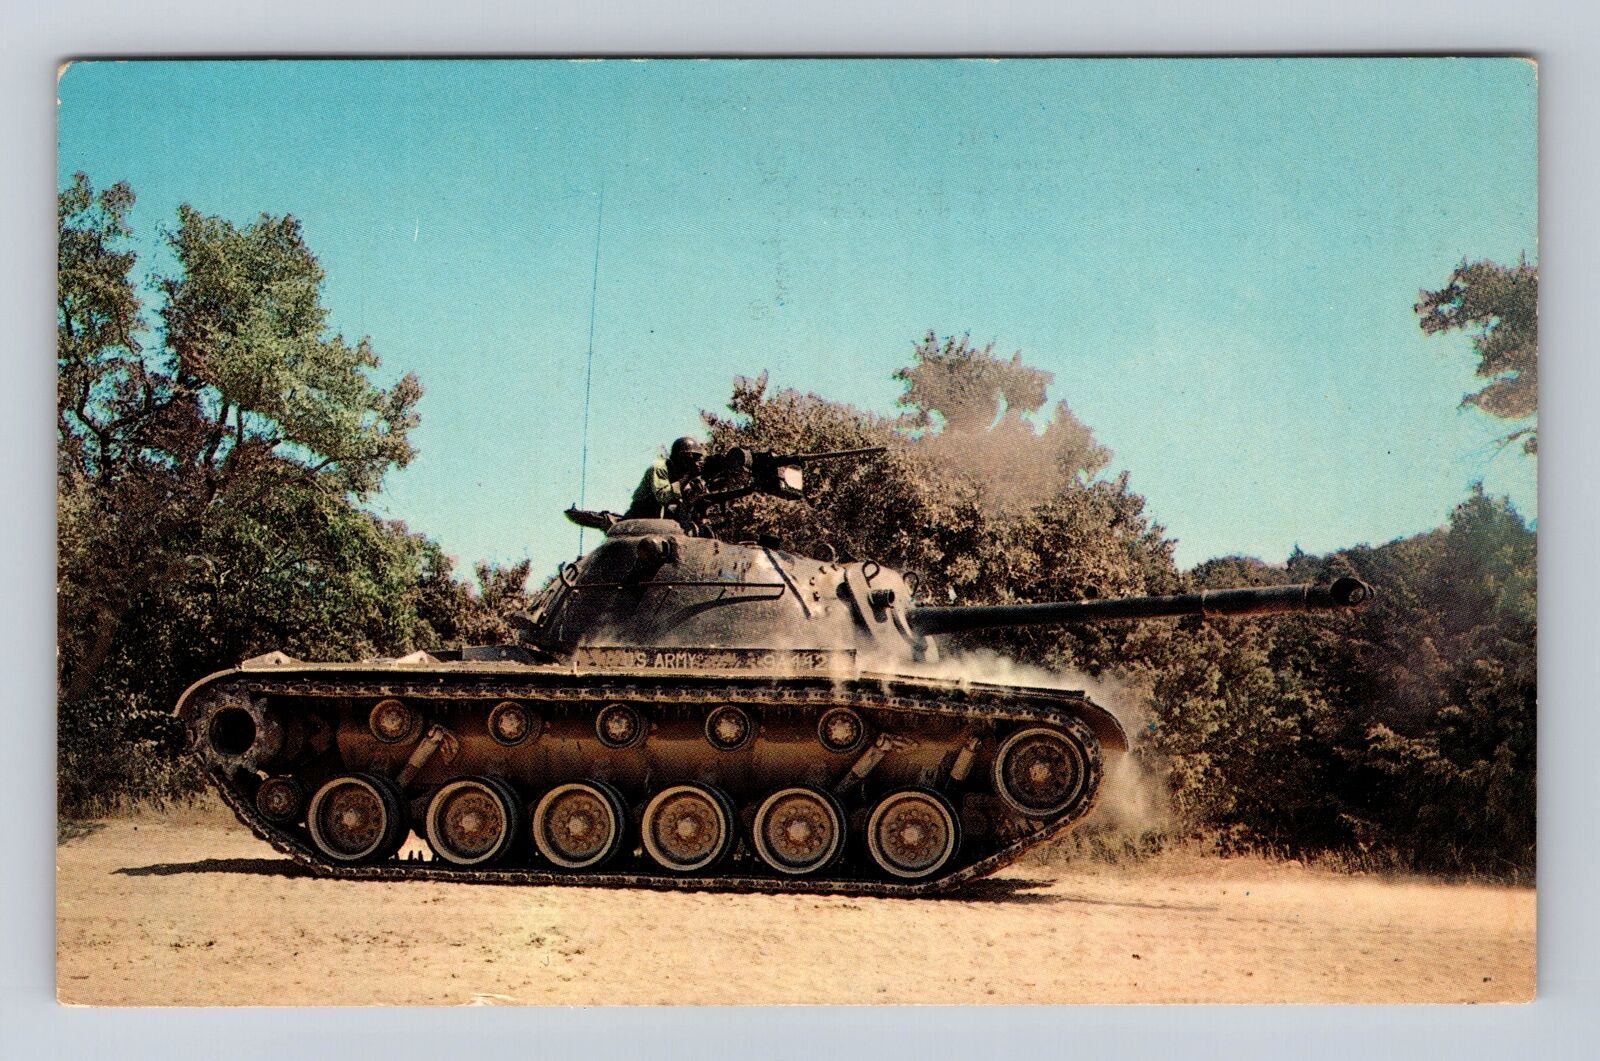 Fort Knox KY-Kentucky, M-48 Tank In Action, Field Exercises, Vintage Postcard